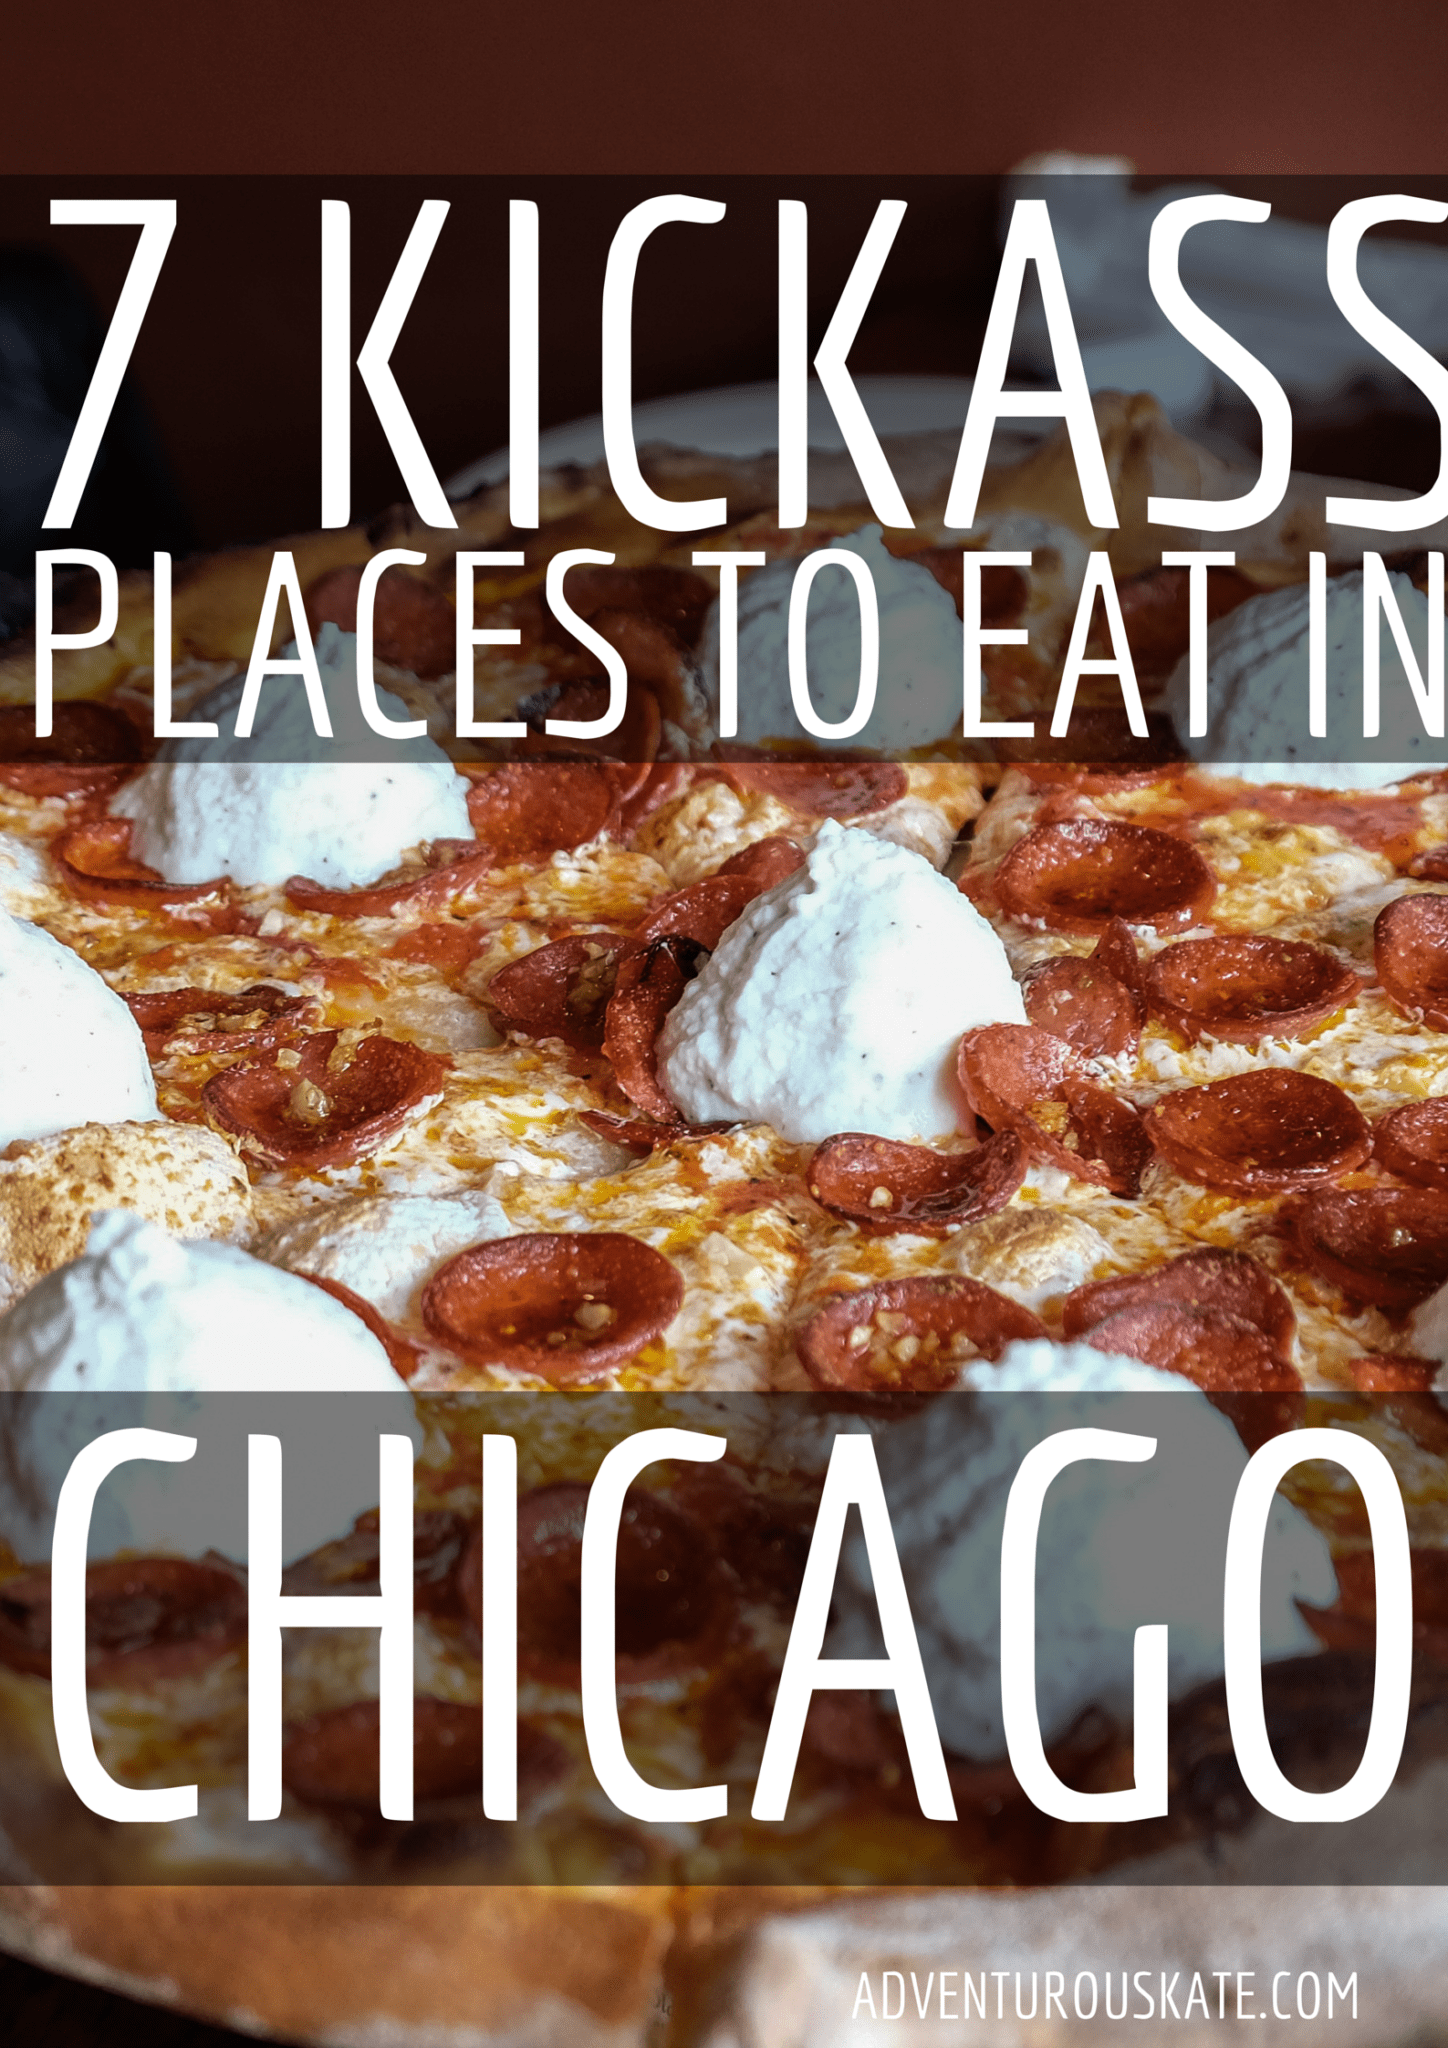 7 Kickass Places to Eat in Chicago